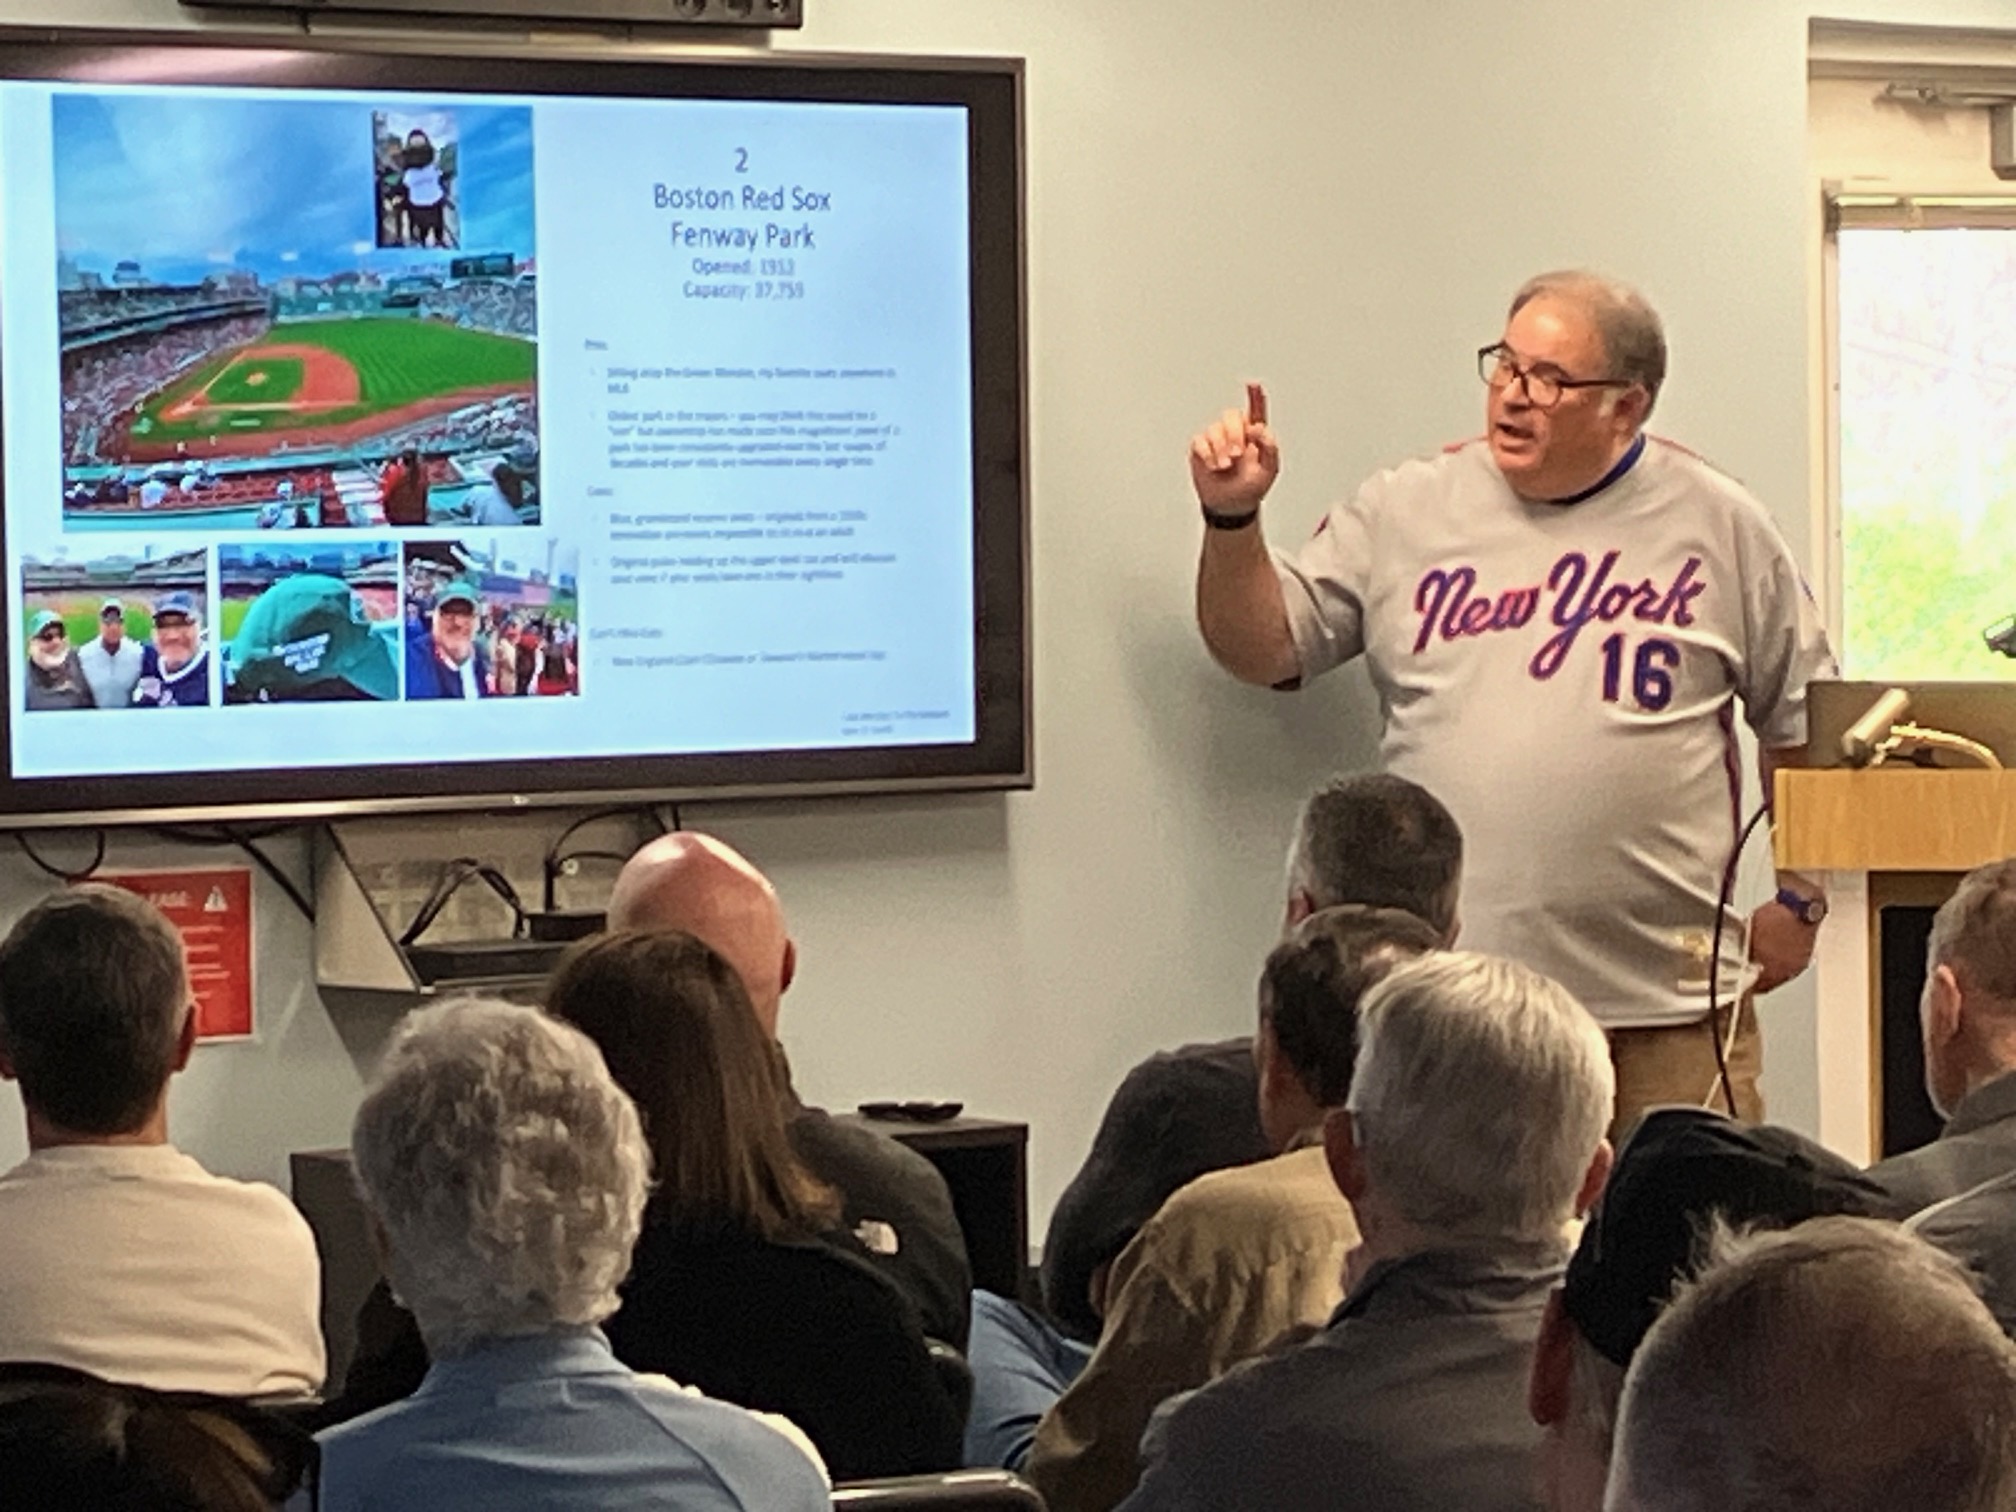 Second Sunday Presentation Takes Attendees Out to the Ballpark